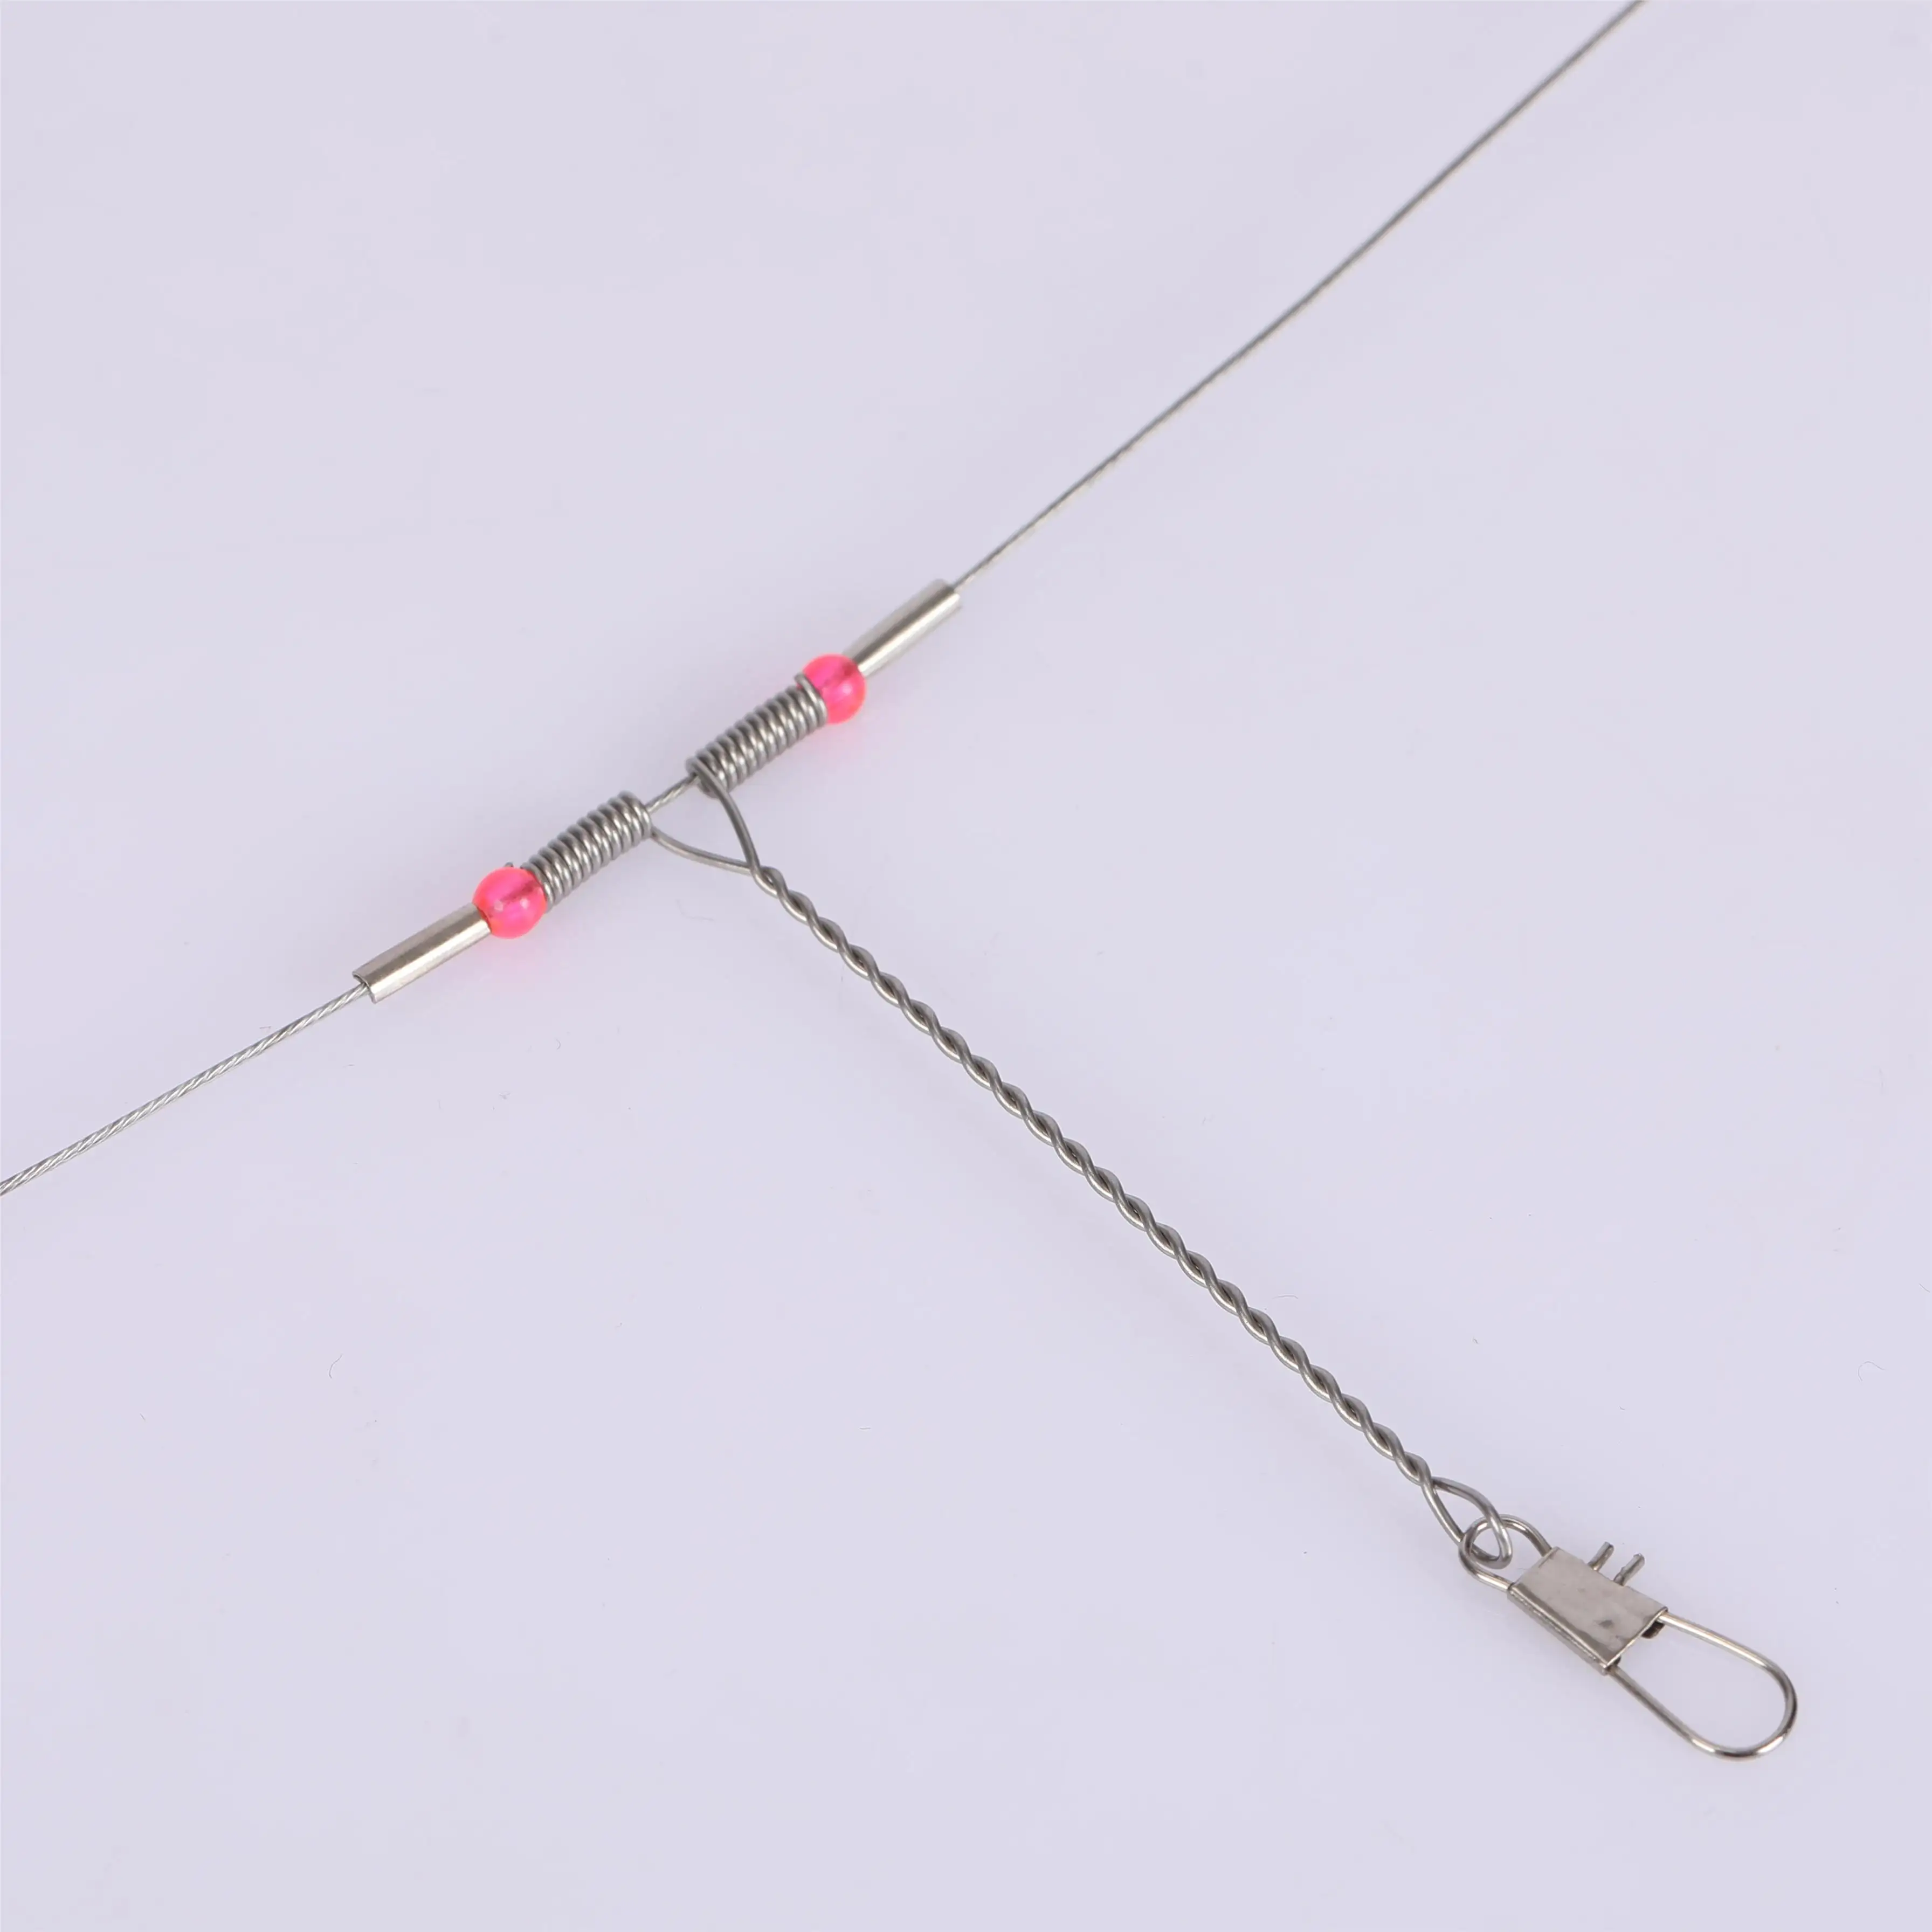 SJ Durable Stainless Steel Wireleader with T-Arm Fishing Rig Seawater Compatible for Ocean Beach and Boat Fishing